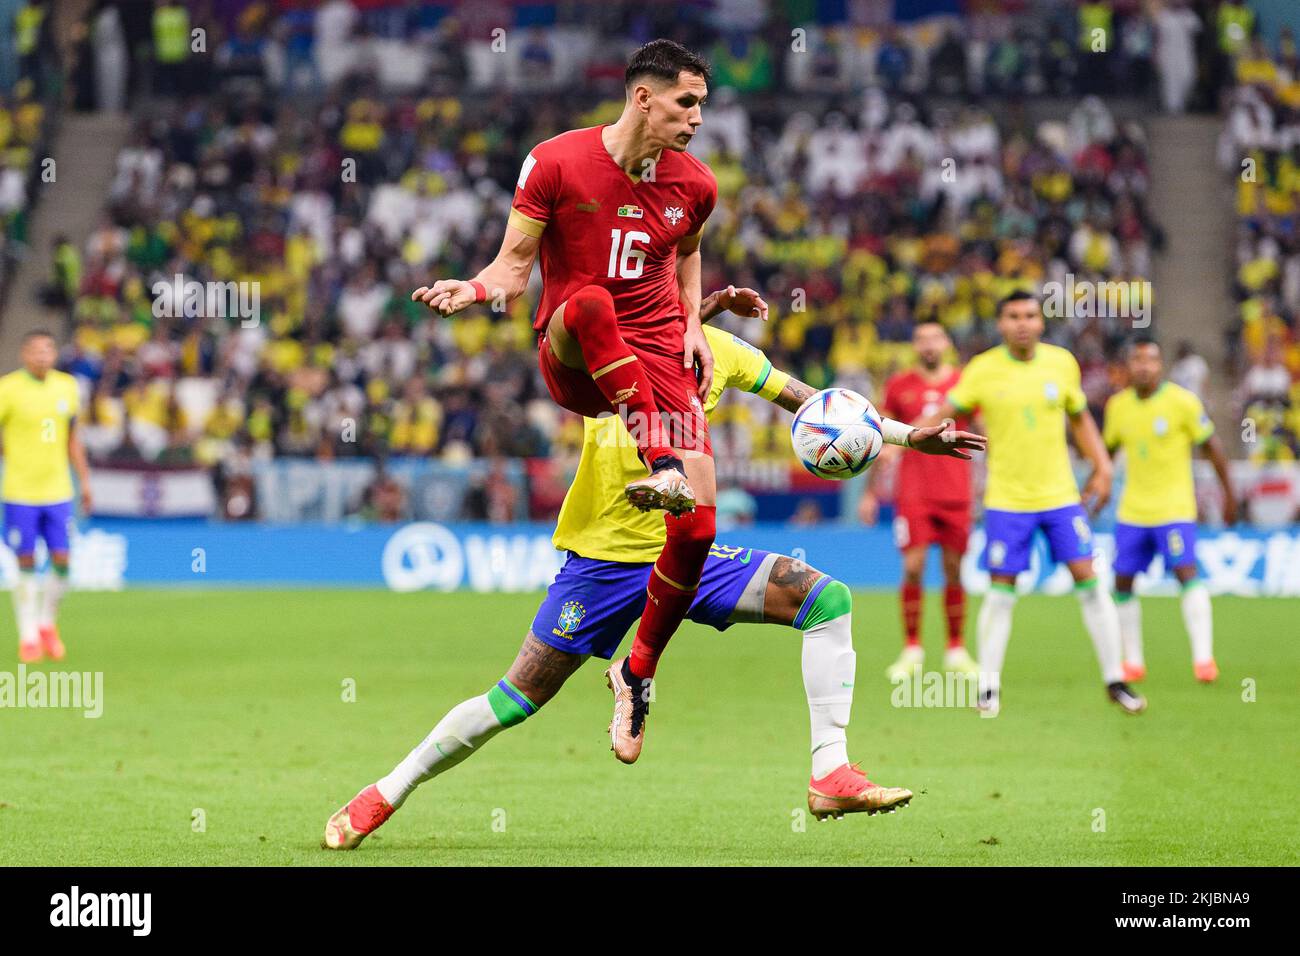 Lusail, Qatar. 24th Nov, 2022. Lusail, Qatar, Nov 25th 2022: Sasa Lukic of Serbia during a match between Brazil vs Serbia, valid for the group stage of the World Cup, held at the Lusail National Stadium in Lusail, Qatar. (Marcio Machado/SPP) Credit: SPP Sport Press Photo. /Alamy Live News Stock Photo